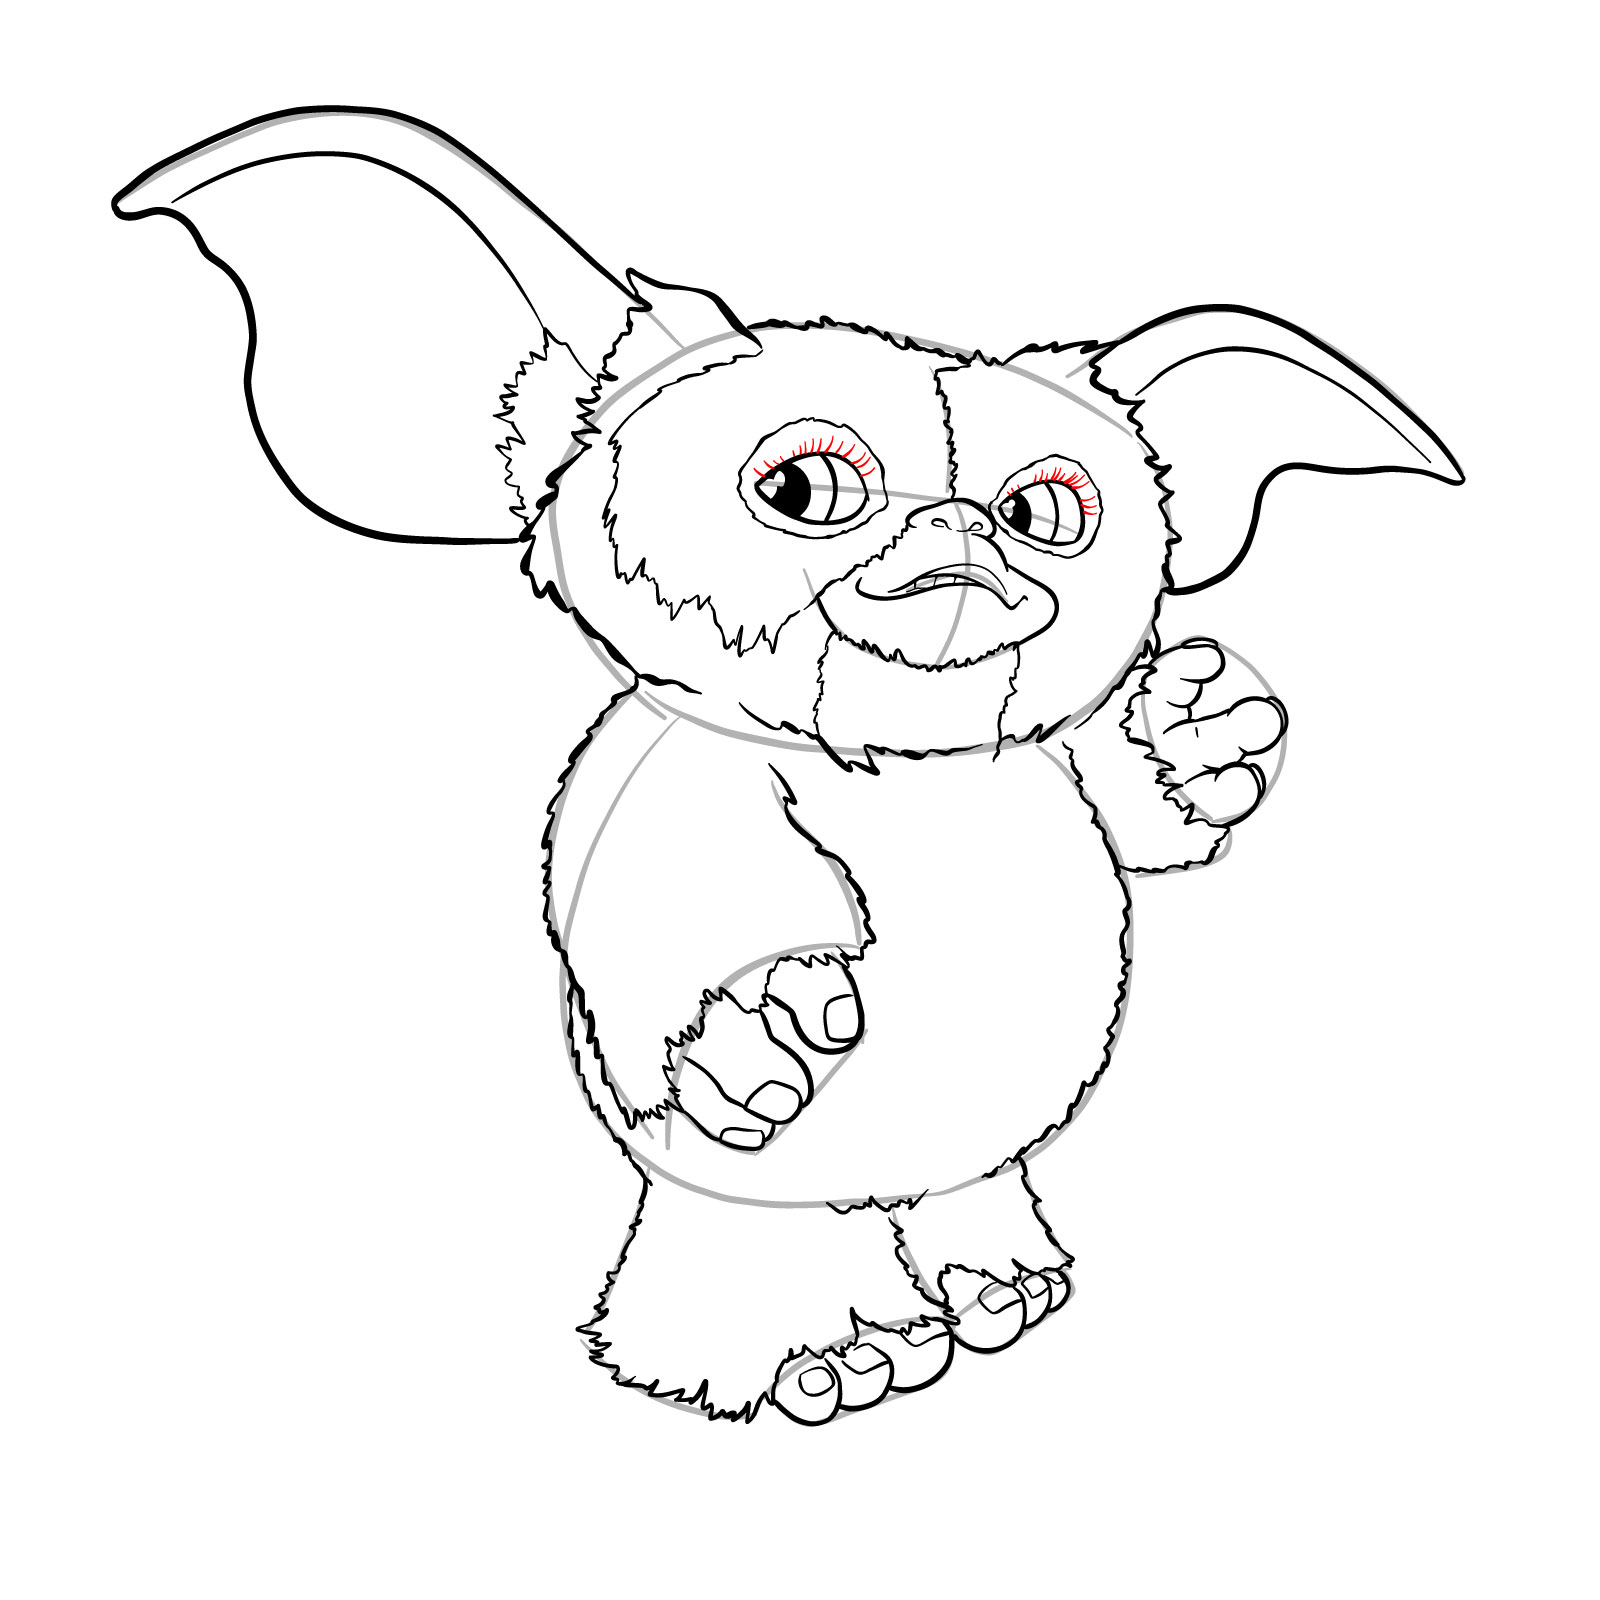 How to draw a Gremlin - step 30